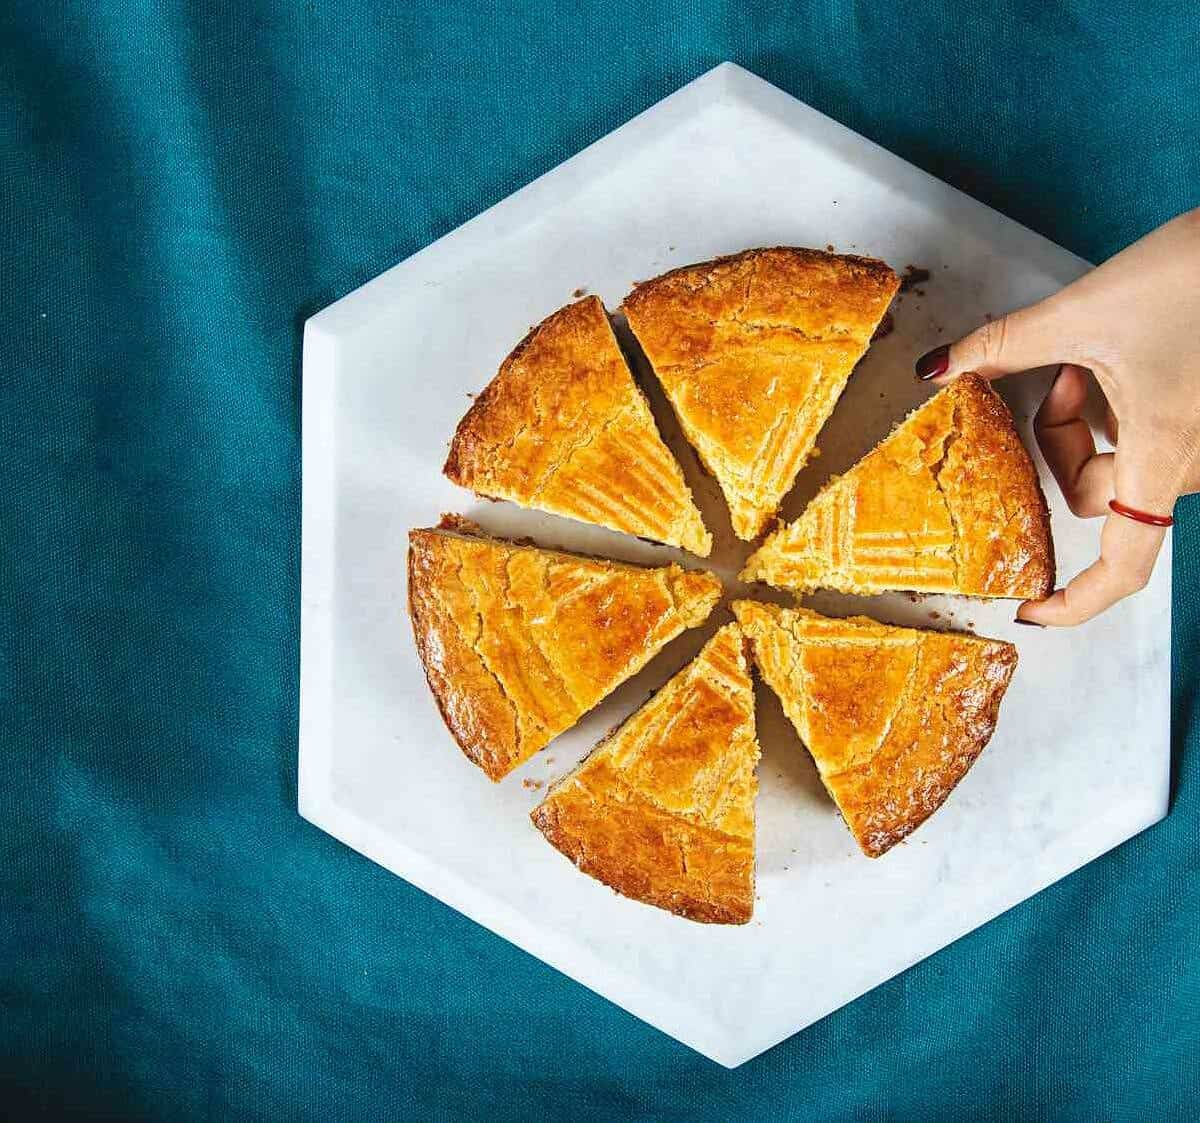  The golden crust on this pastry is simply irresistible.